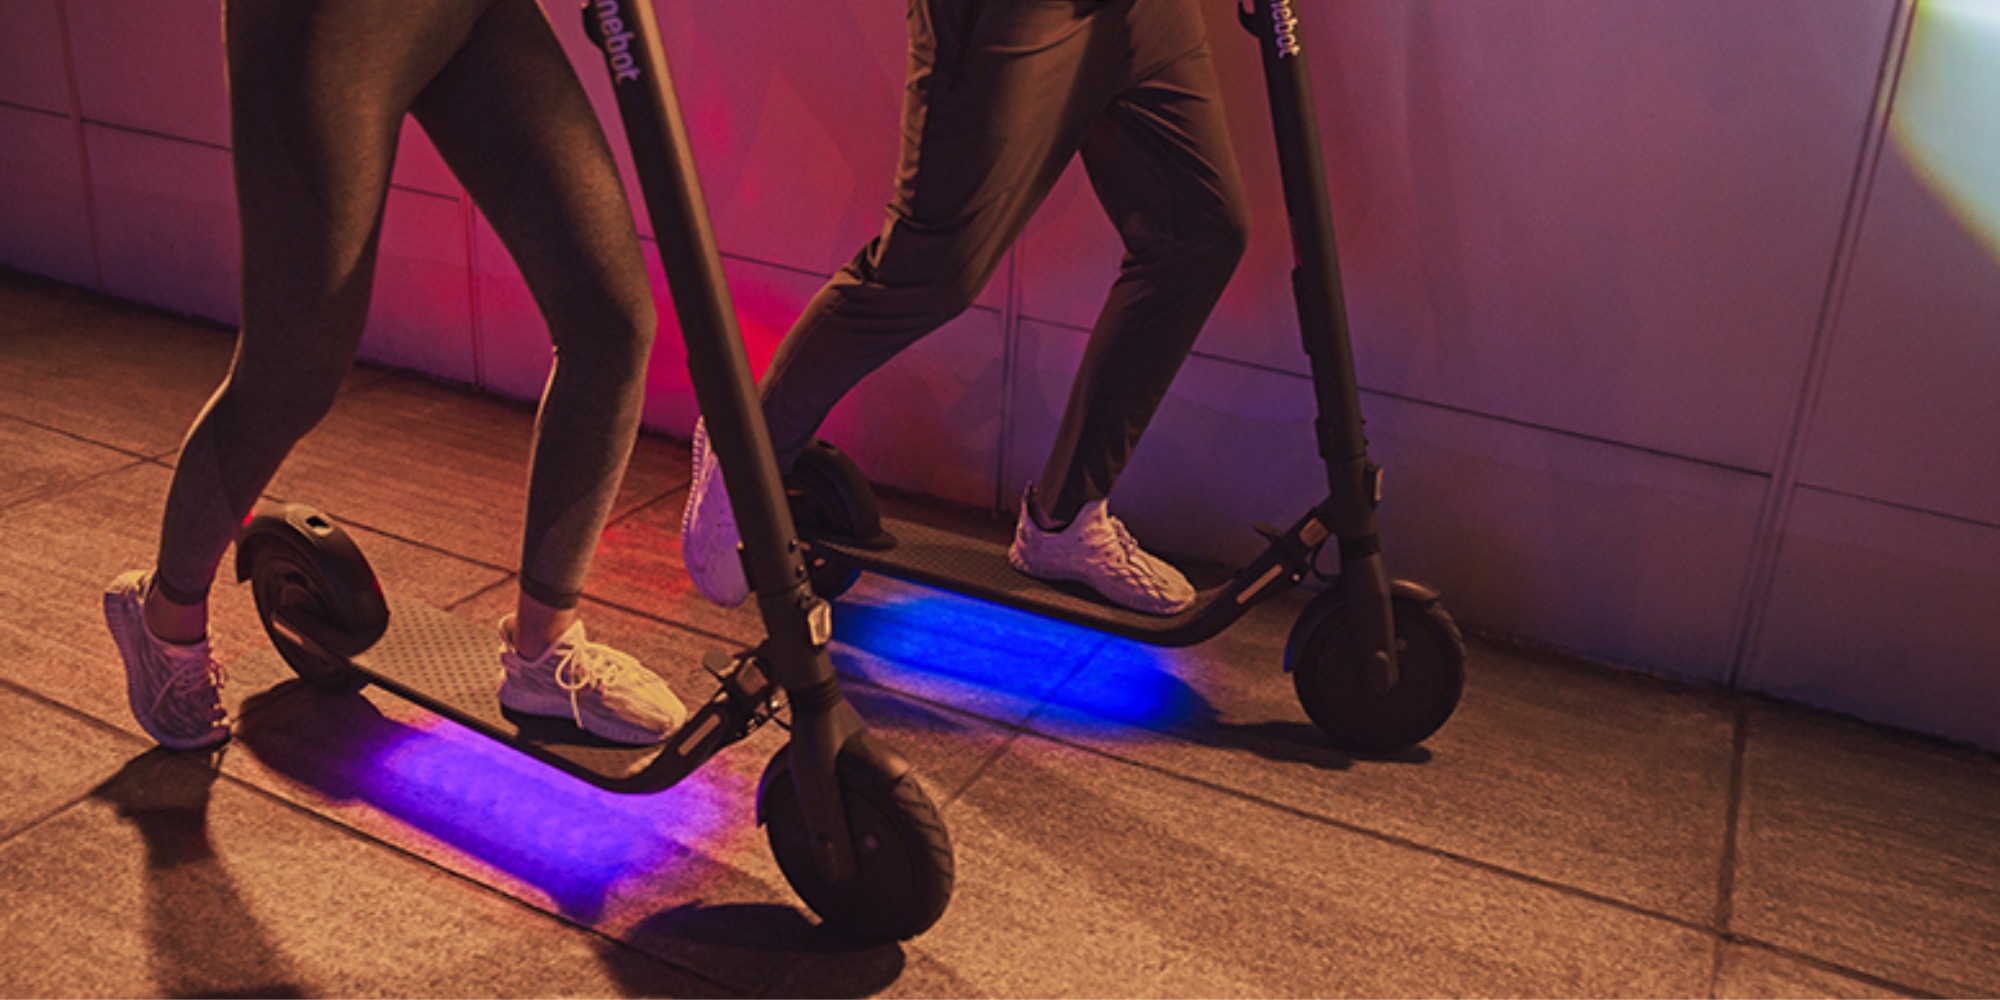 Segway's new Ninebot E25 electric kick scooter first discount to $650 (Save $120), more